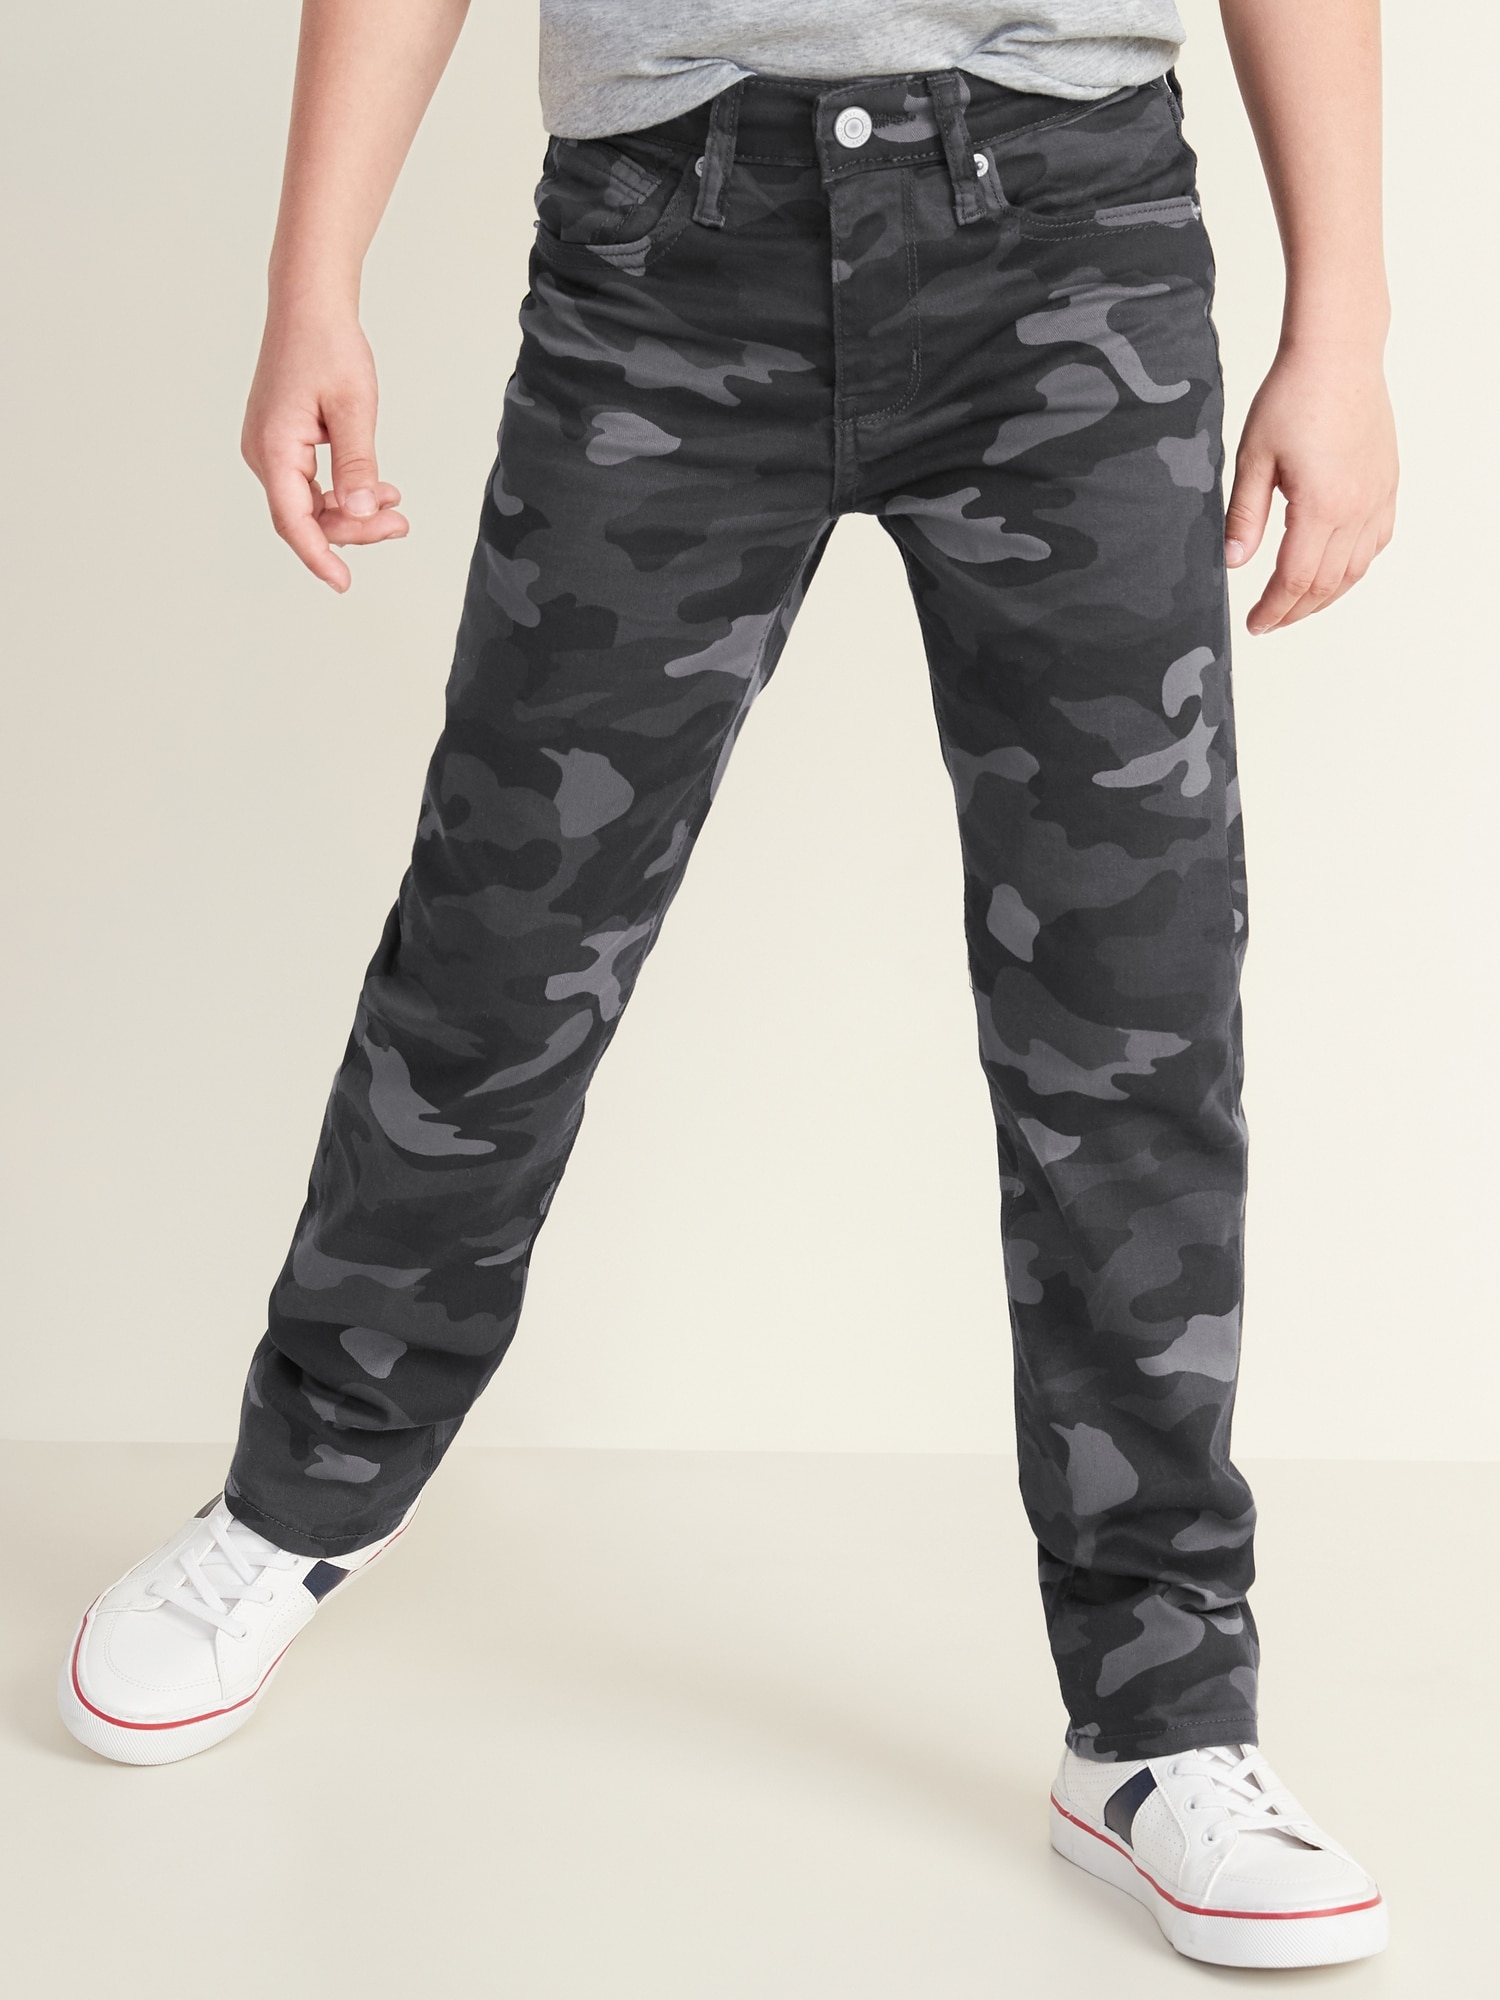 camo jeans old navy